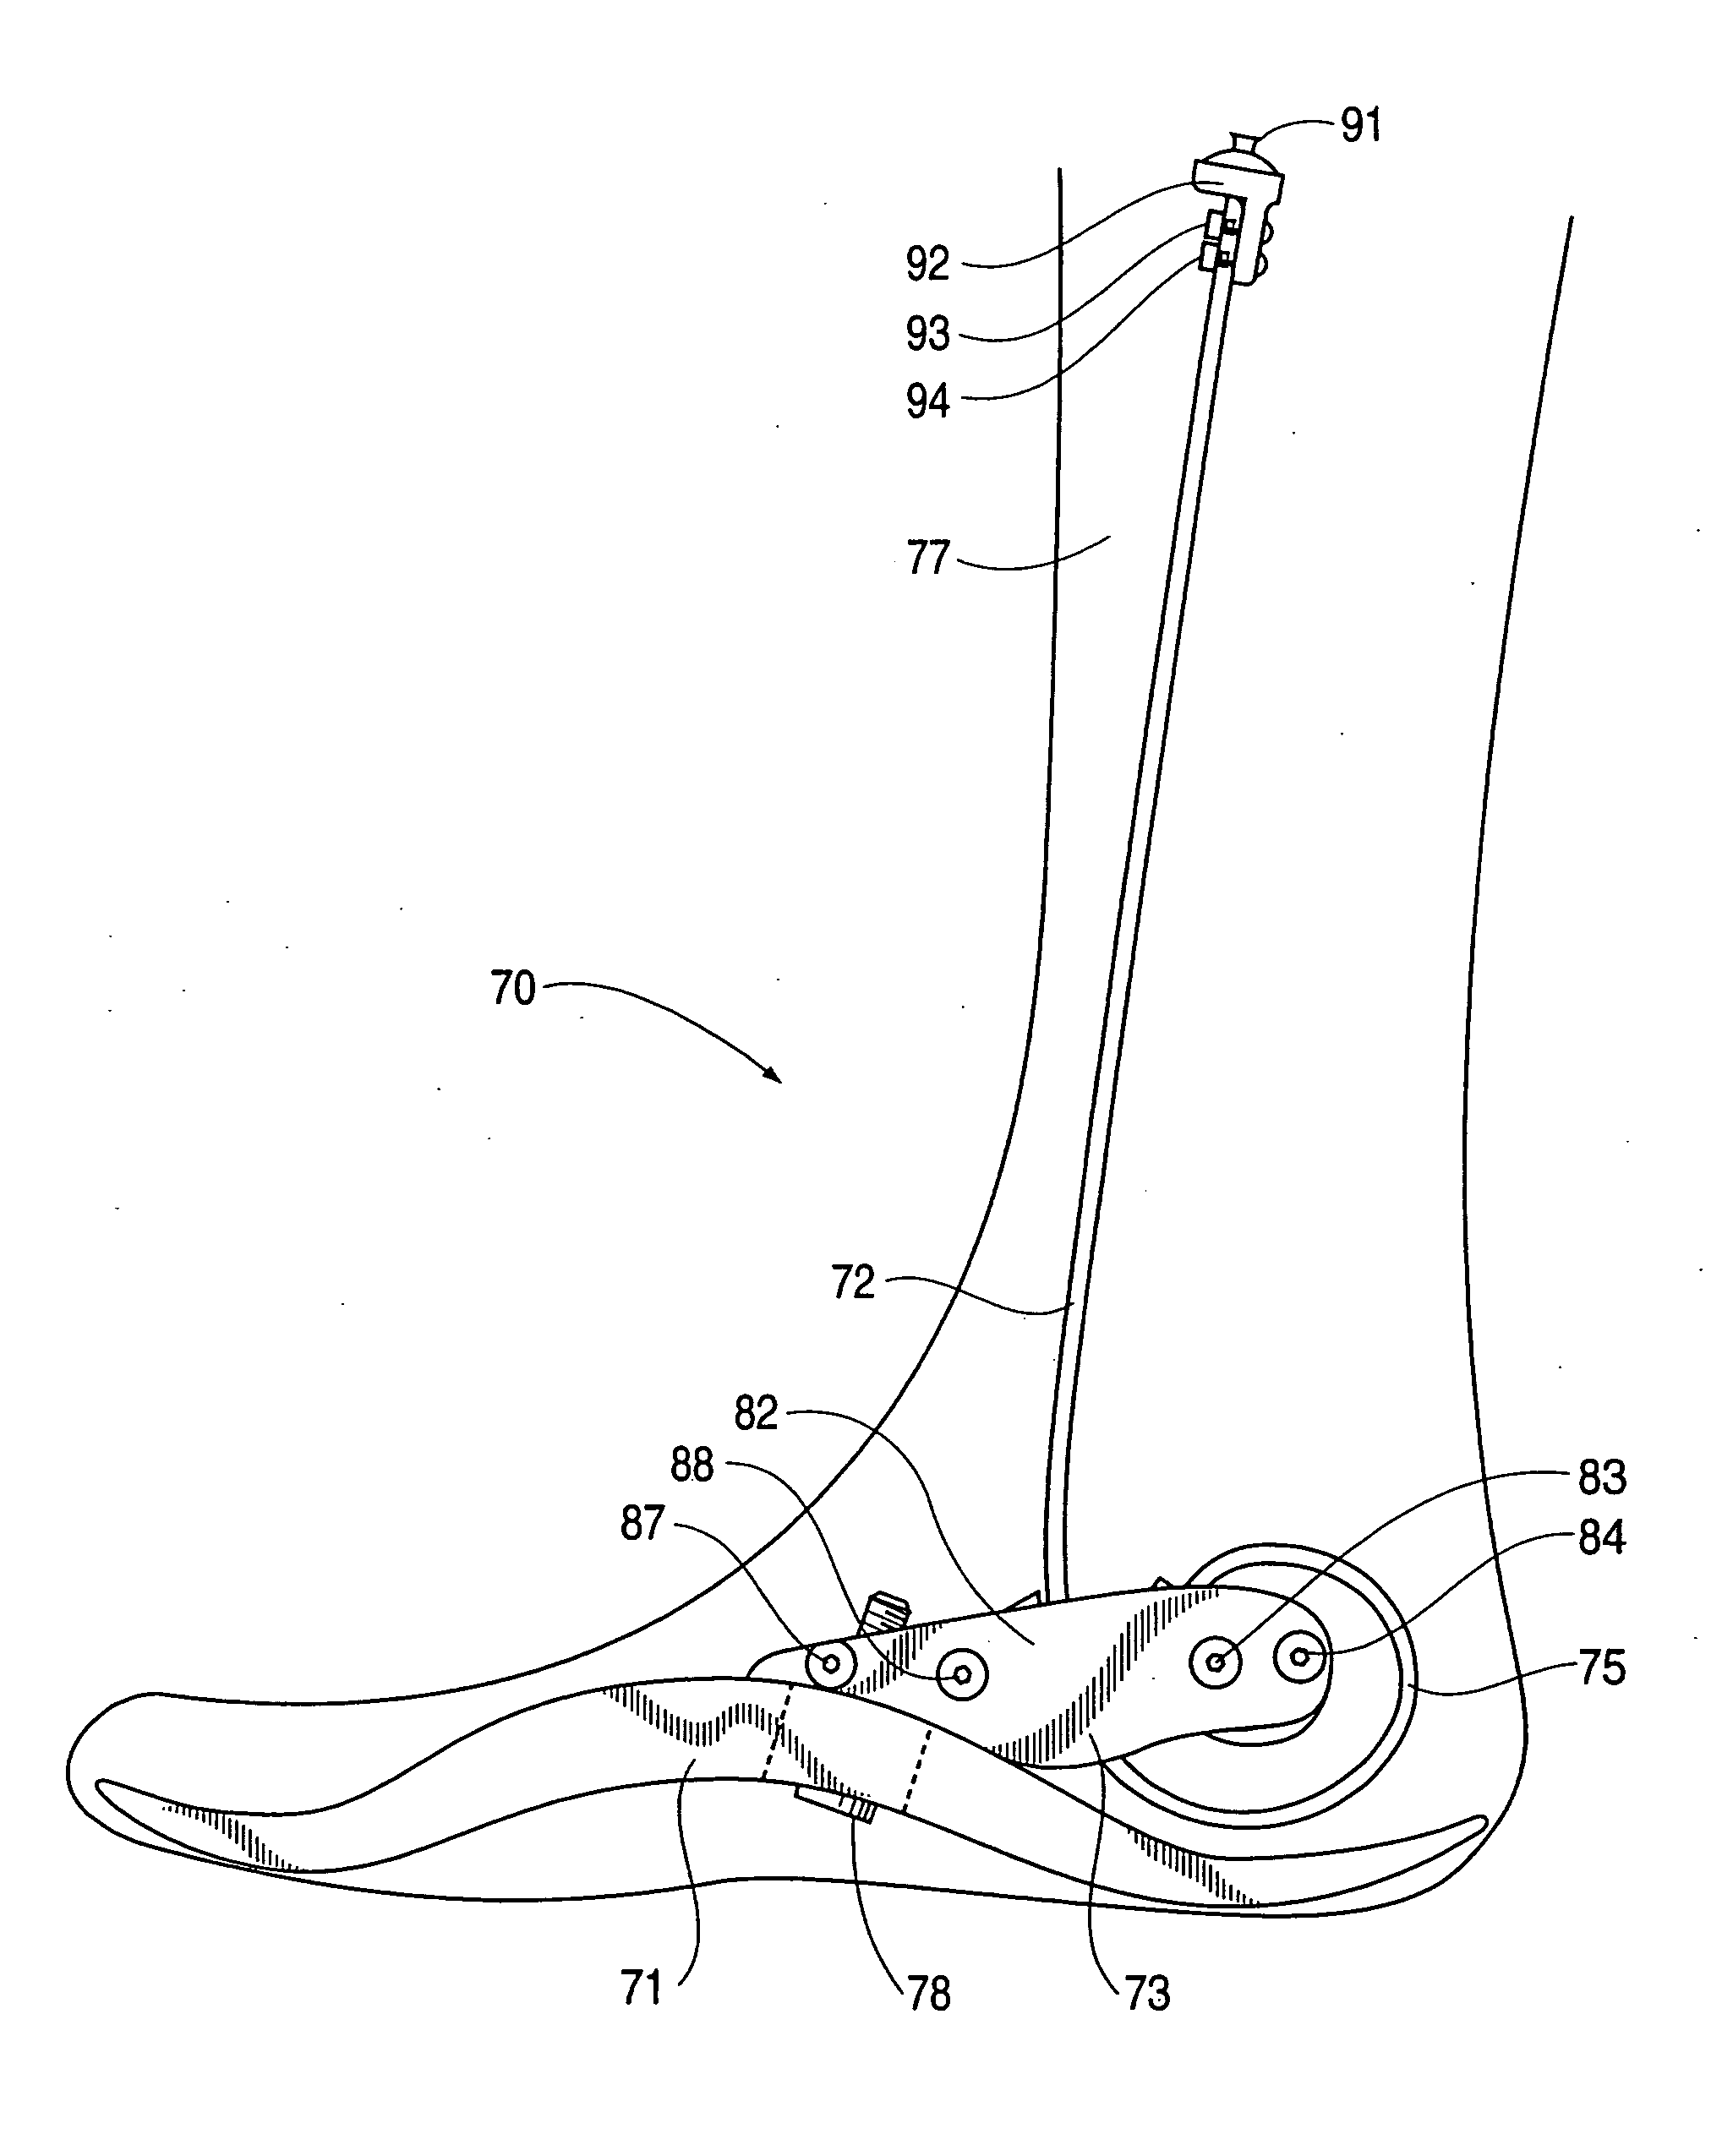 Prosthetic Foot with Tunable Performance